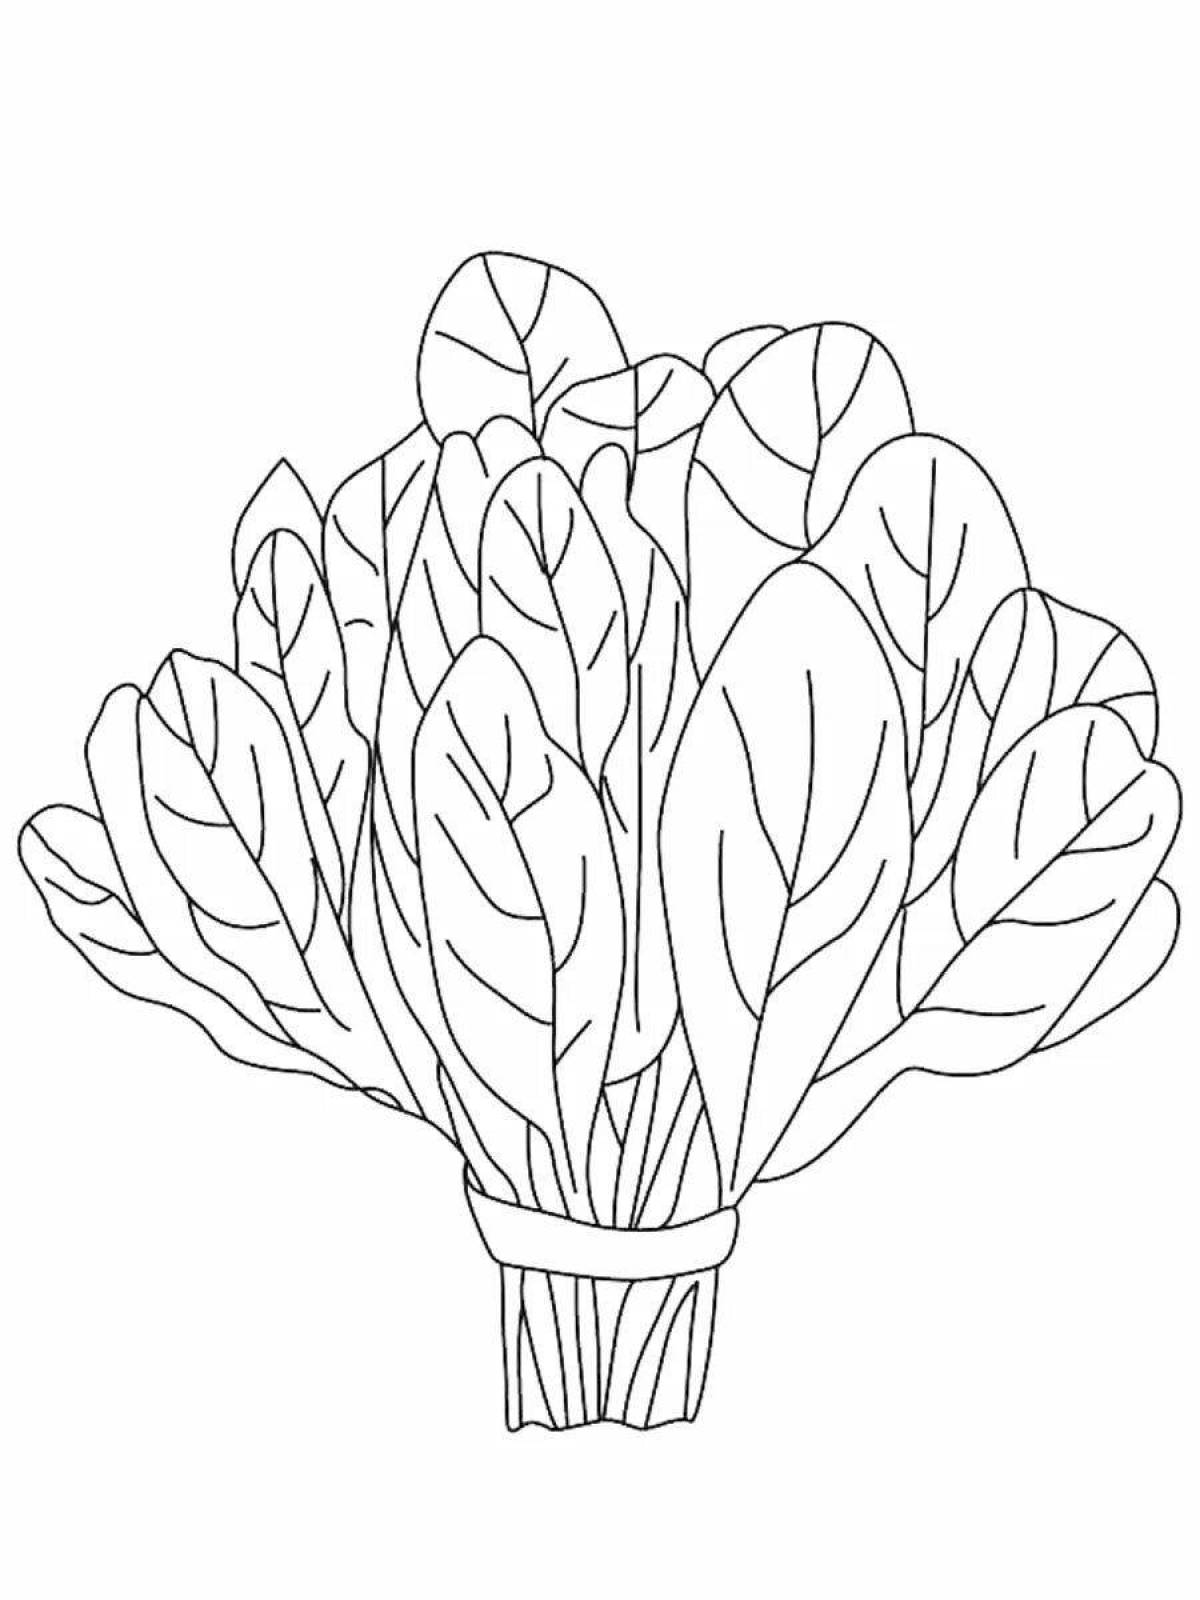 Colorful sorrel coloring page for kids